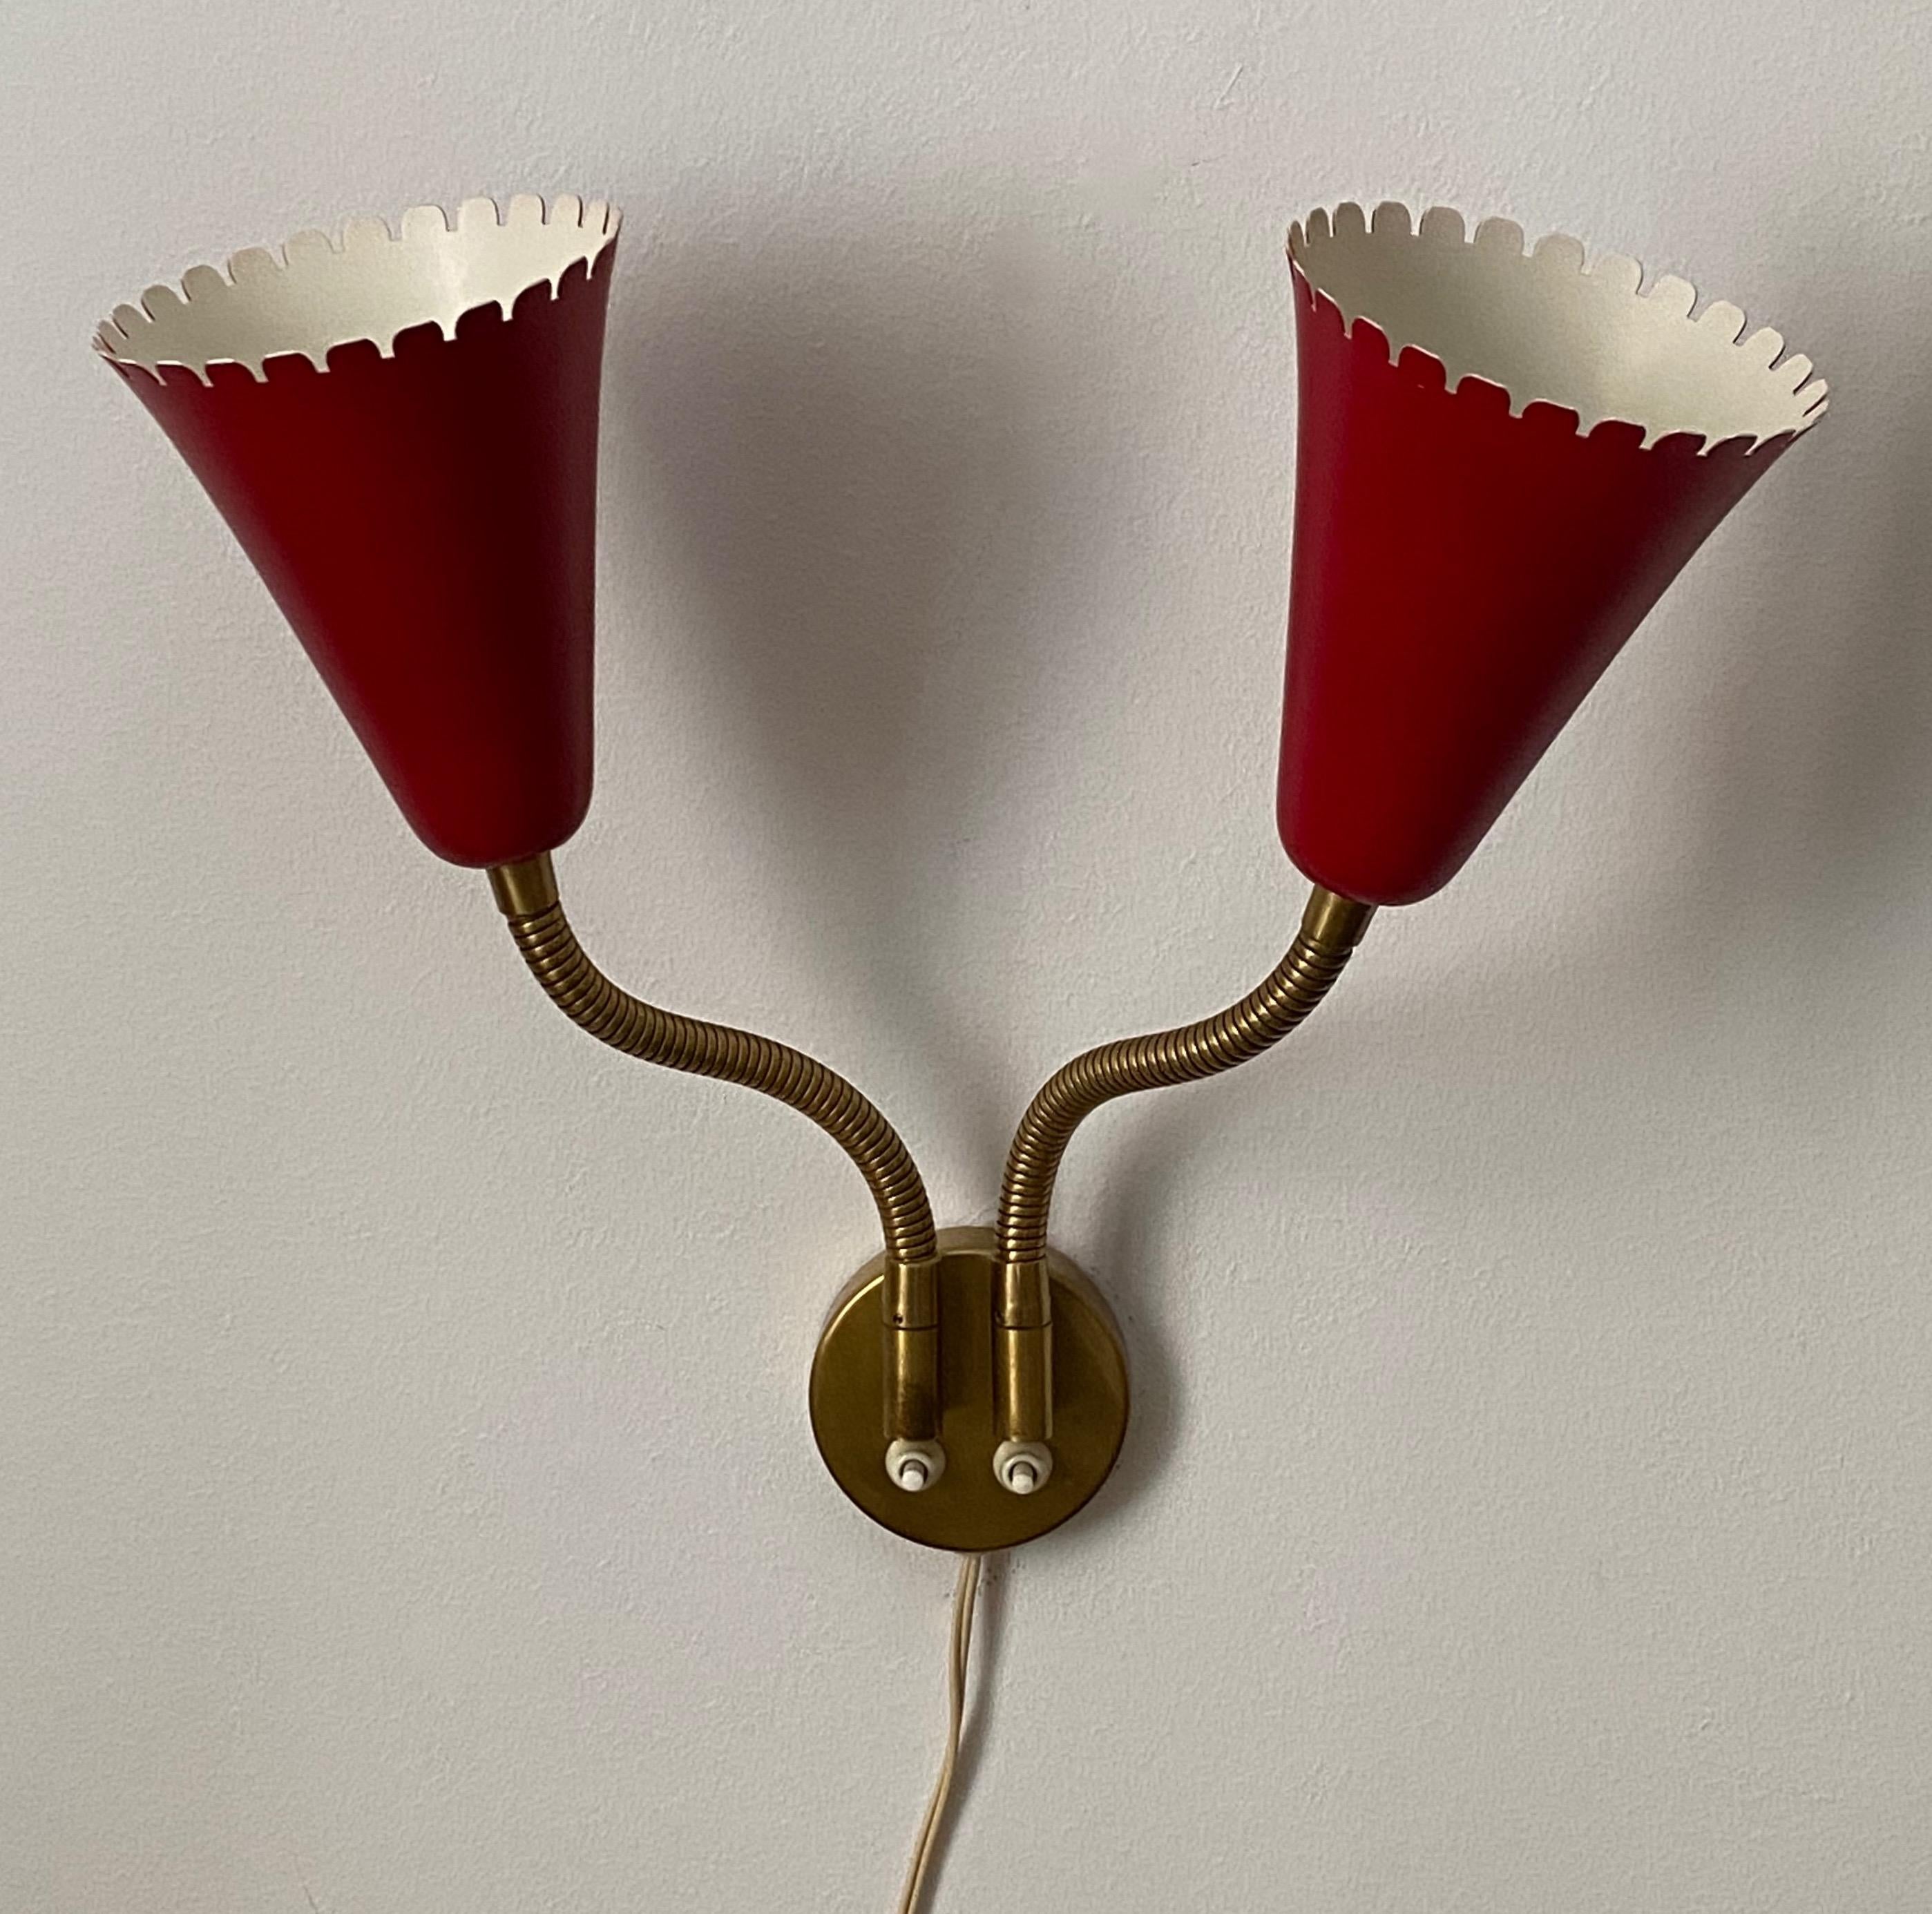 An adjustable organic wall light / sconce. Designed and produced in Sweden, 1950s. In brass and red-lacquered metal. Markings indicate patented design. 

Other designers of the period include Jean Royere, Paolo Buffa, Gino Sarfatti, Hans